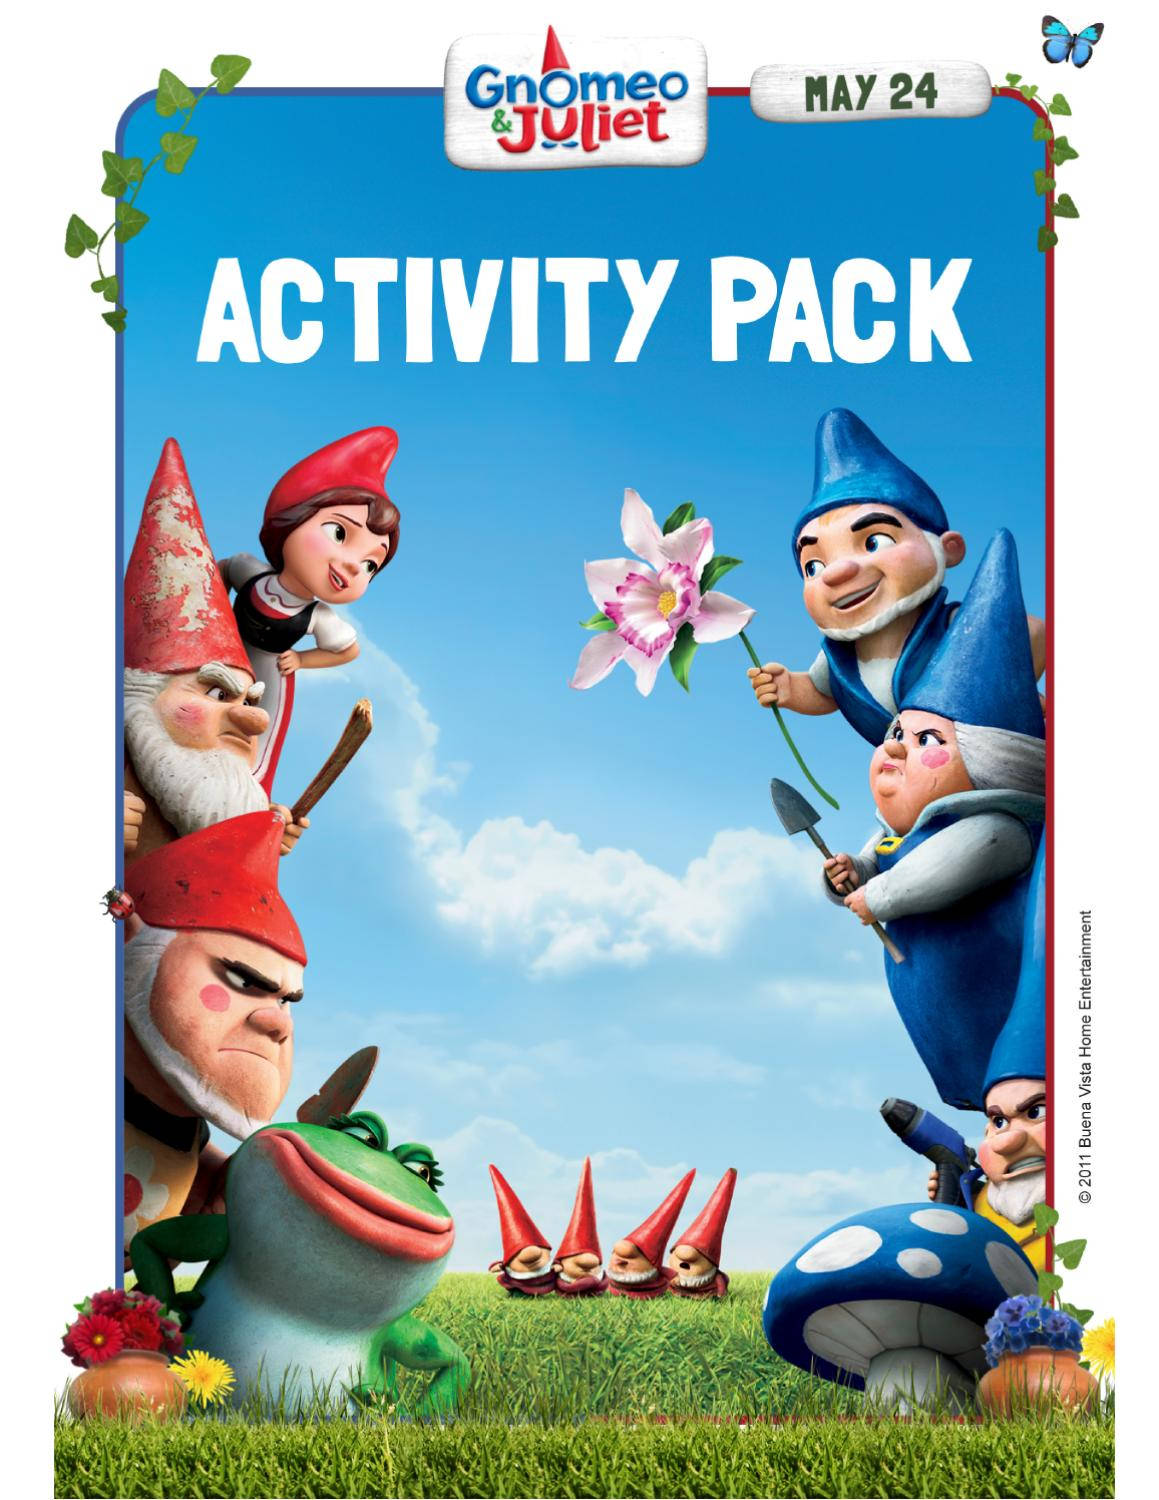 Gnomeo And Juliet Activity Pack Wallpaper